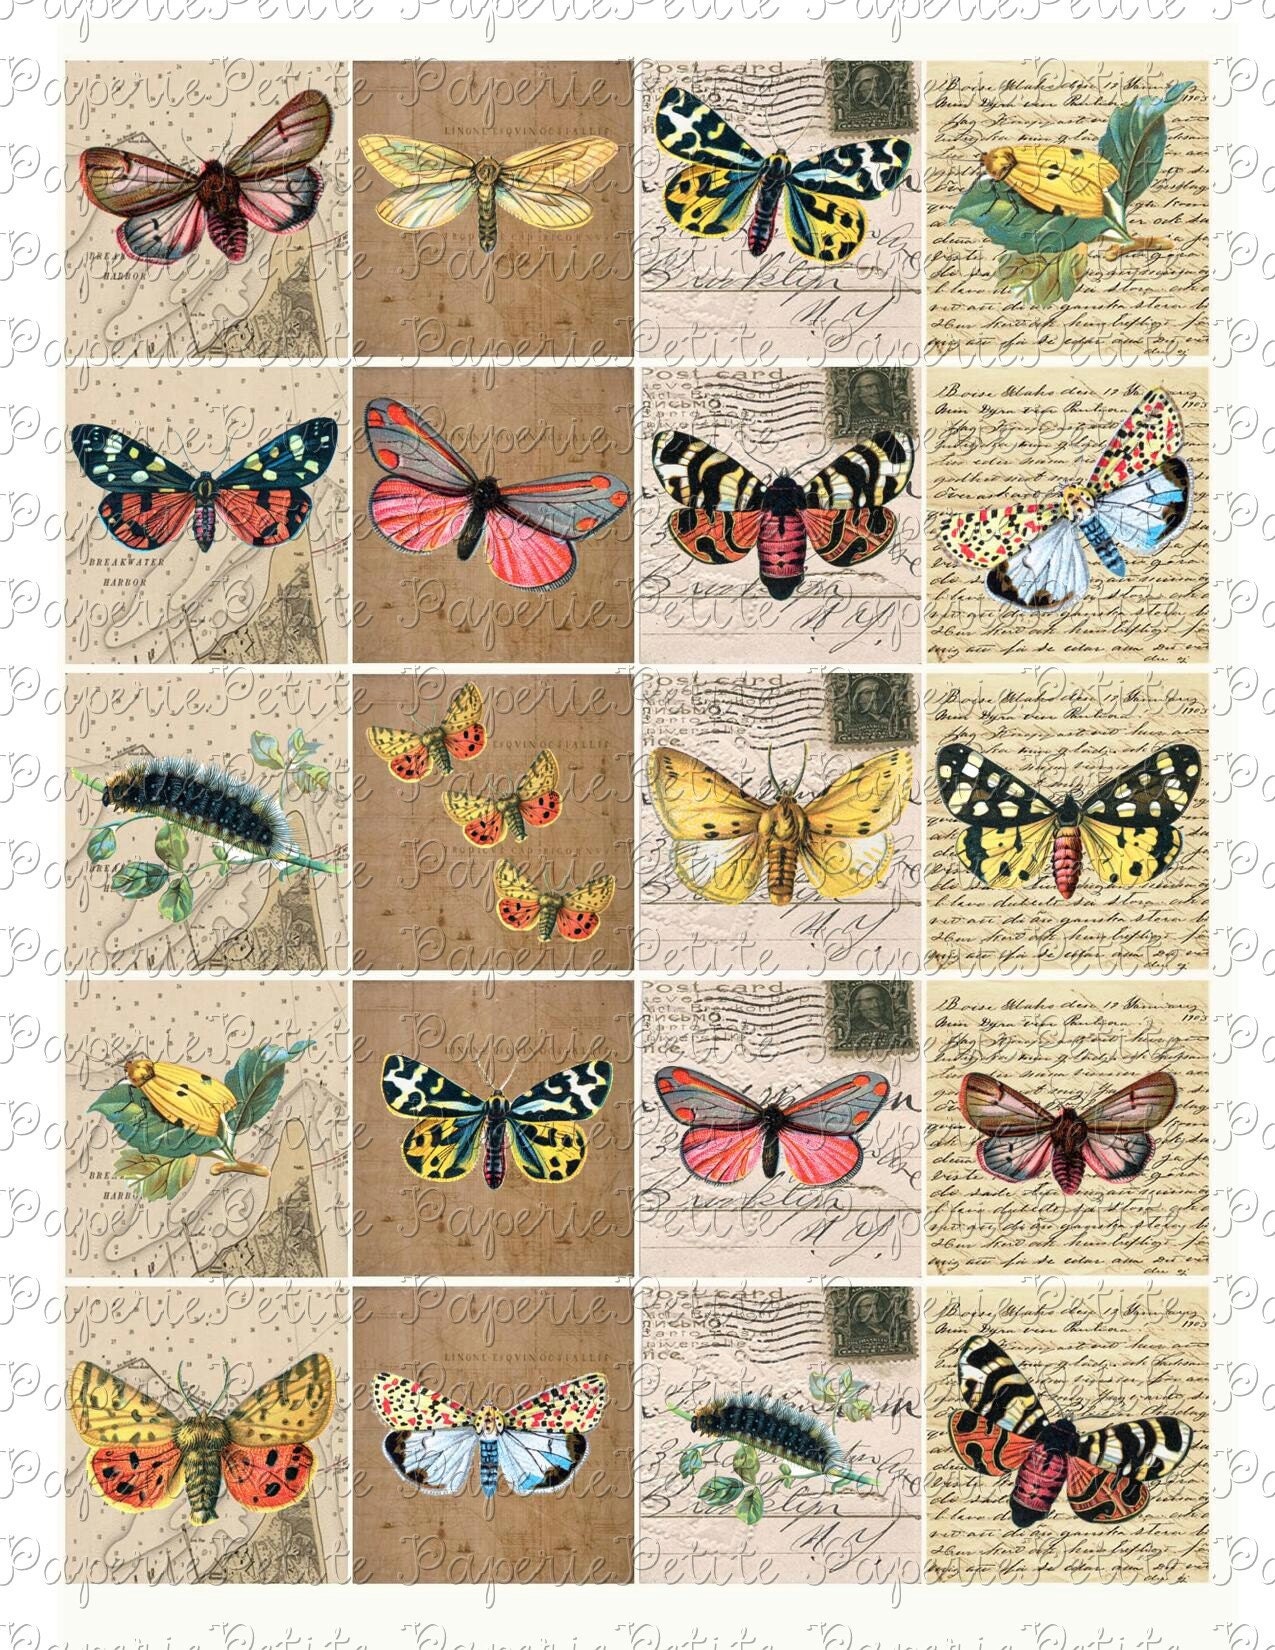 2-x-2-inch-mixed-media-butterfly-digital-download-collage-sheet-by